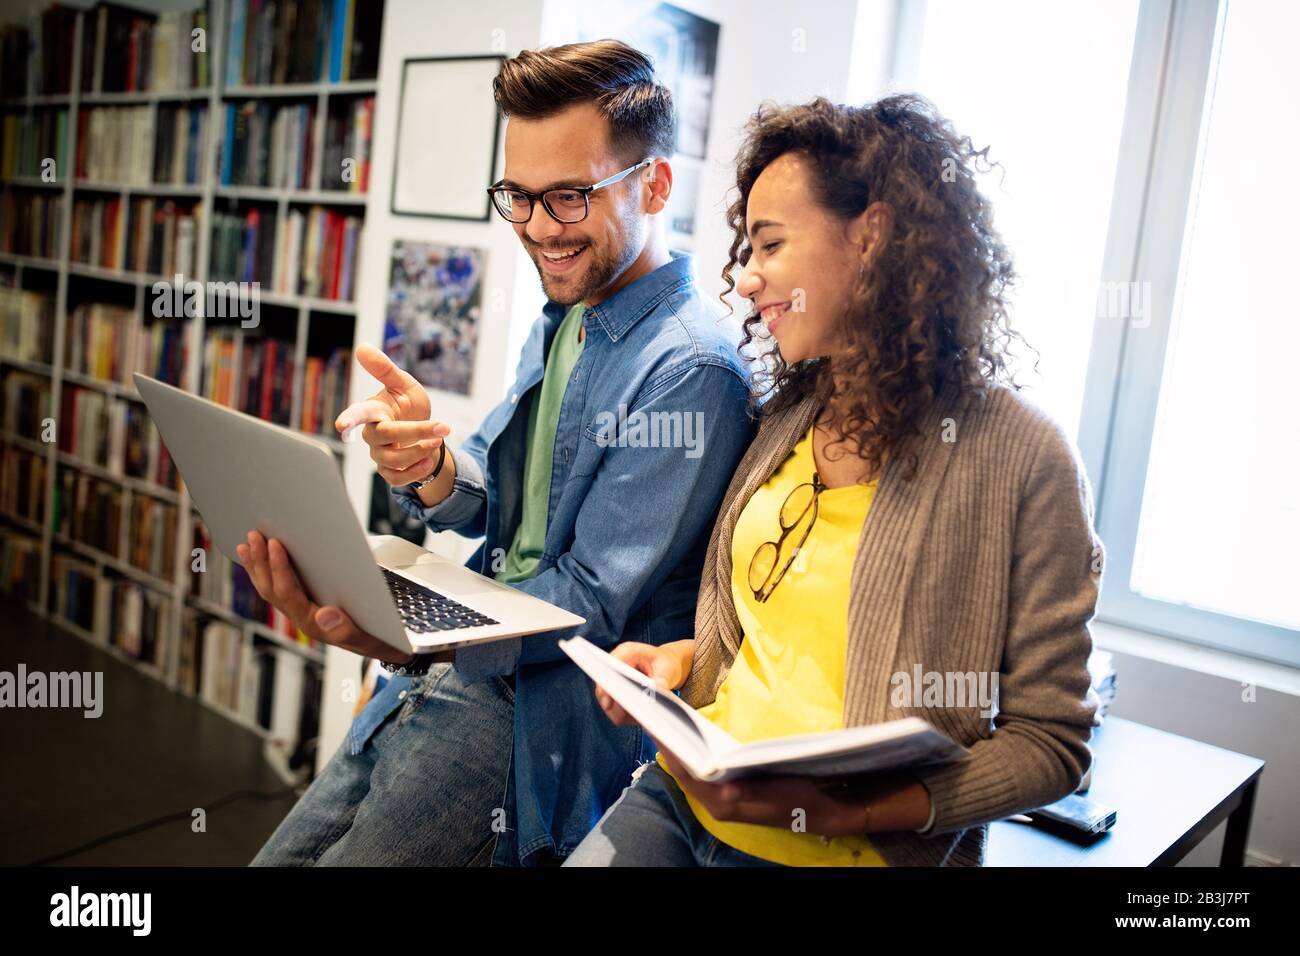 Group of college students studying in the school library. Stock Photo